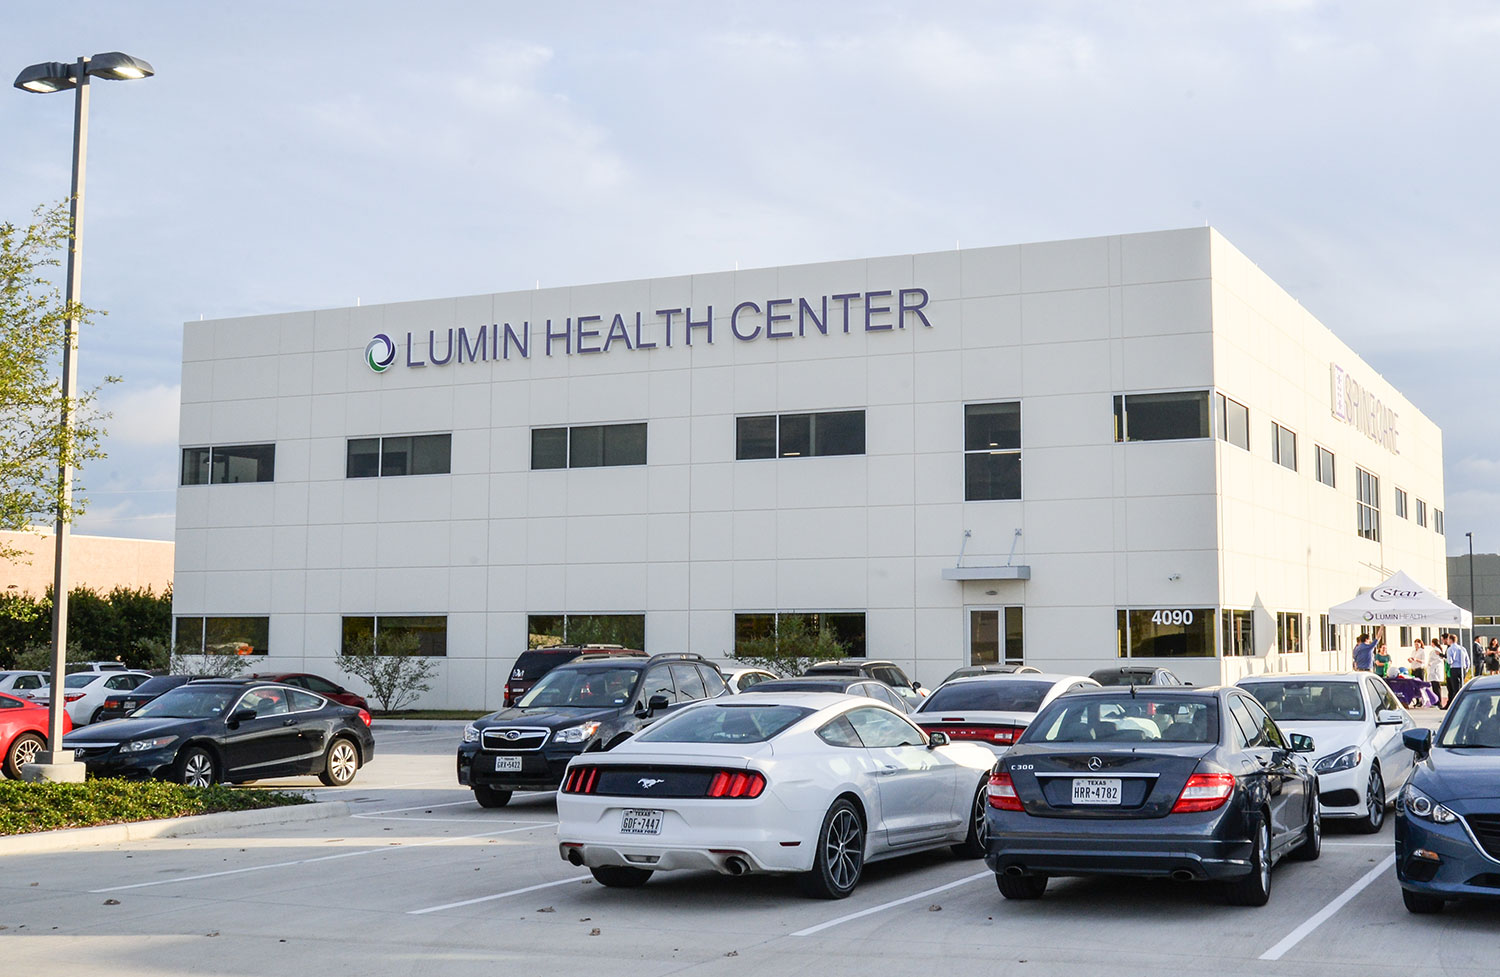 Lumin Health Care, serving patients all over the Metroplex, multiple urgent care/family care clinics; comprehensive spine, orthopedic and pain management centers; freestanding E.R. facilities and licensed acute care surgical hospital.